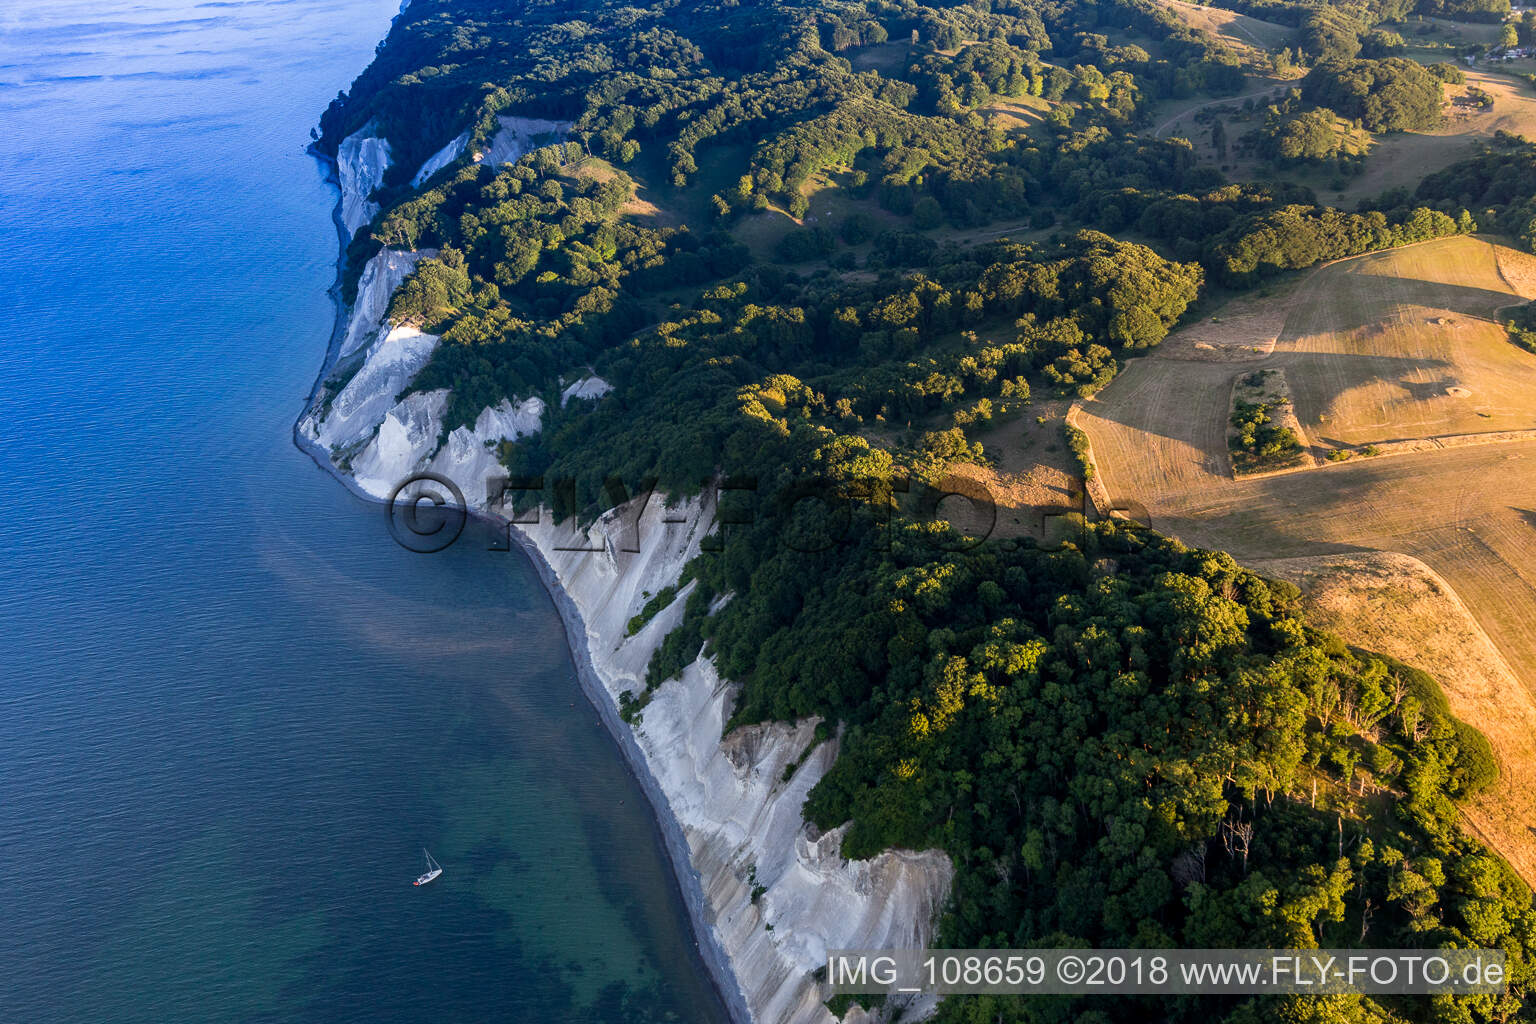 Forests of Moens Klint on the high shores of the Baltic sea in Borre in Region Sjaelland, Denmark